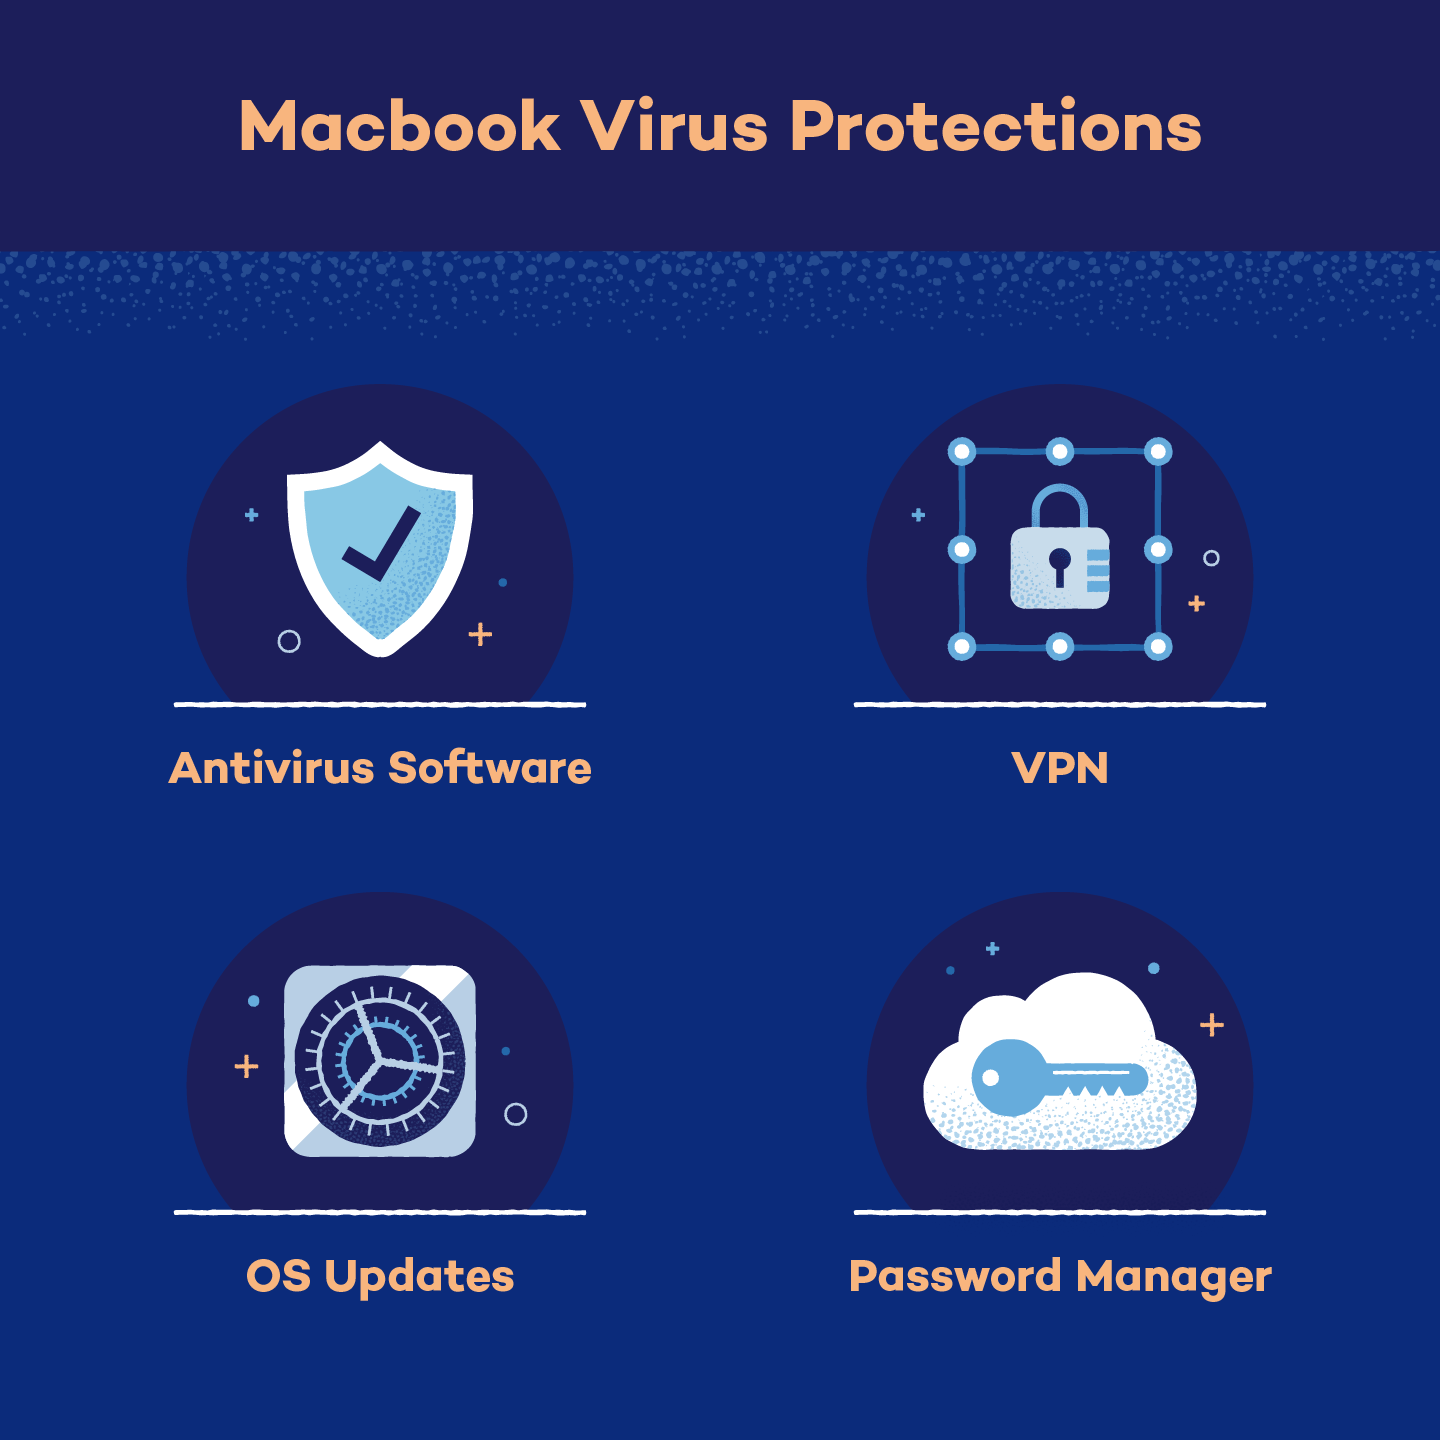 Macs can be protected from viruses by antivirus software, VPNs, and more.